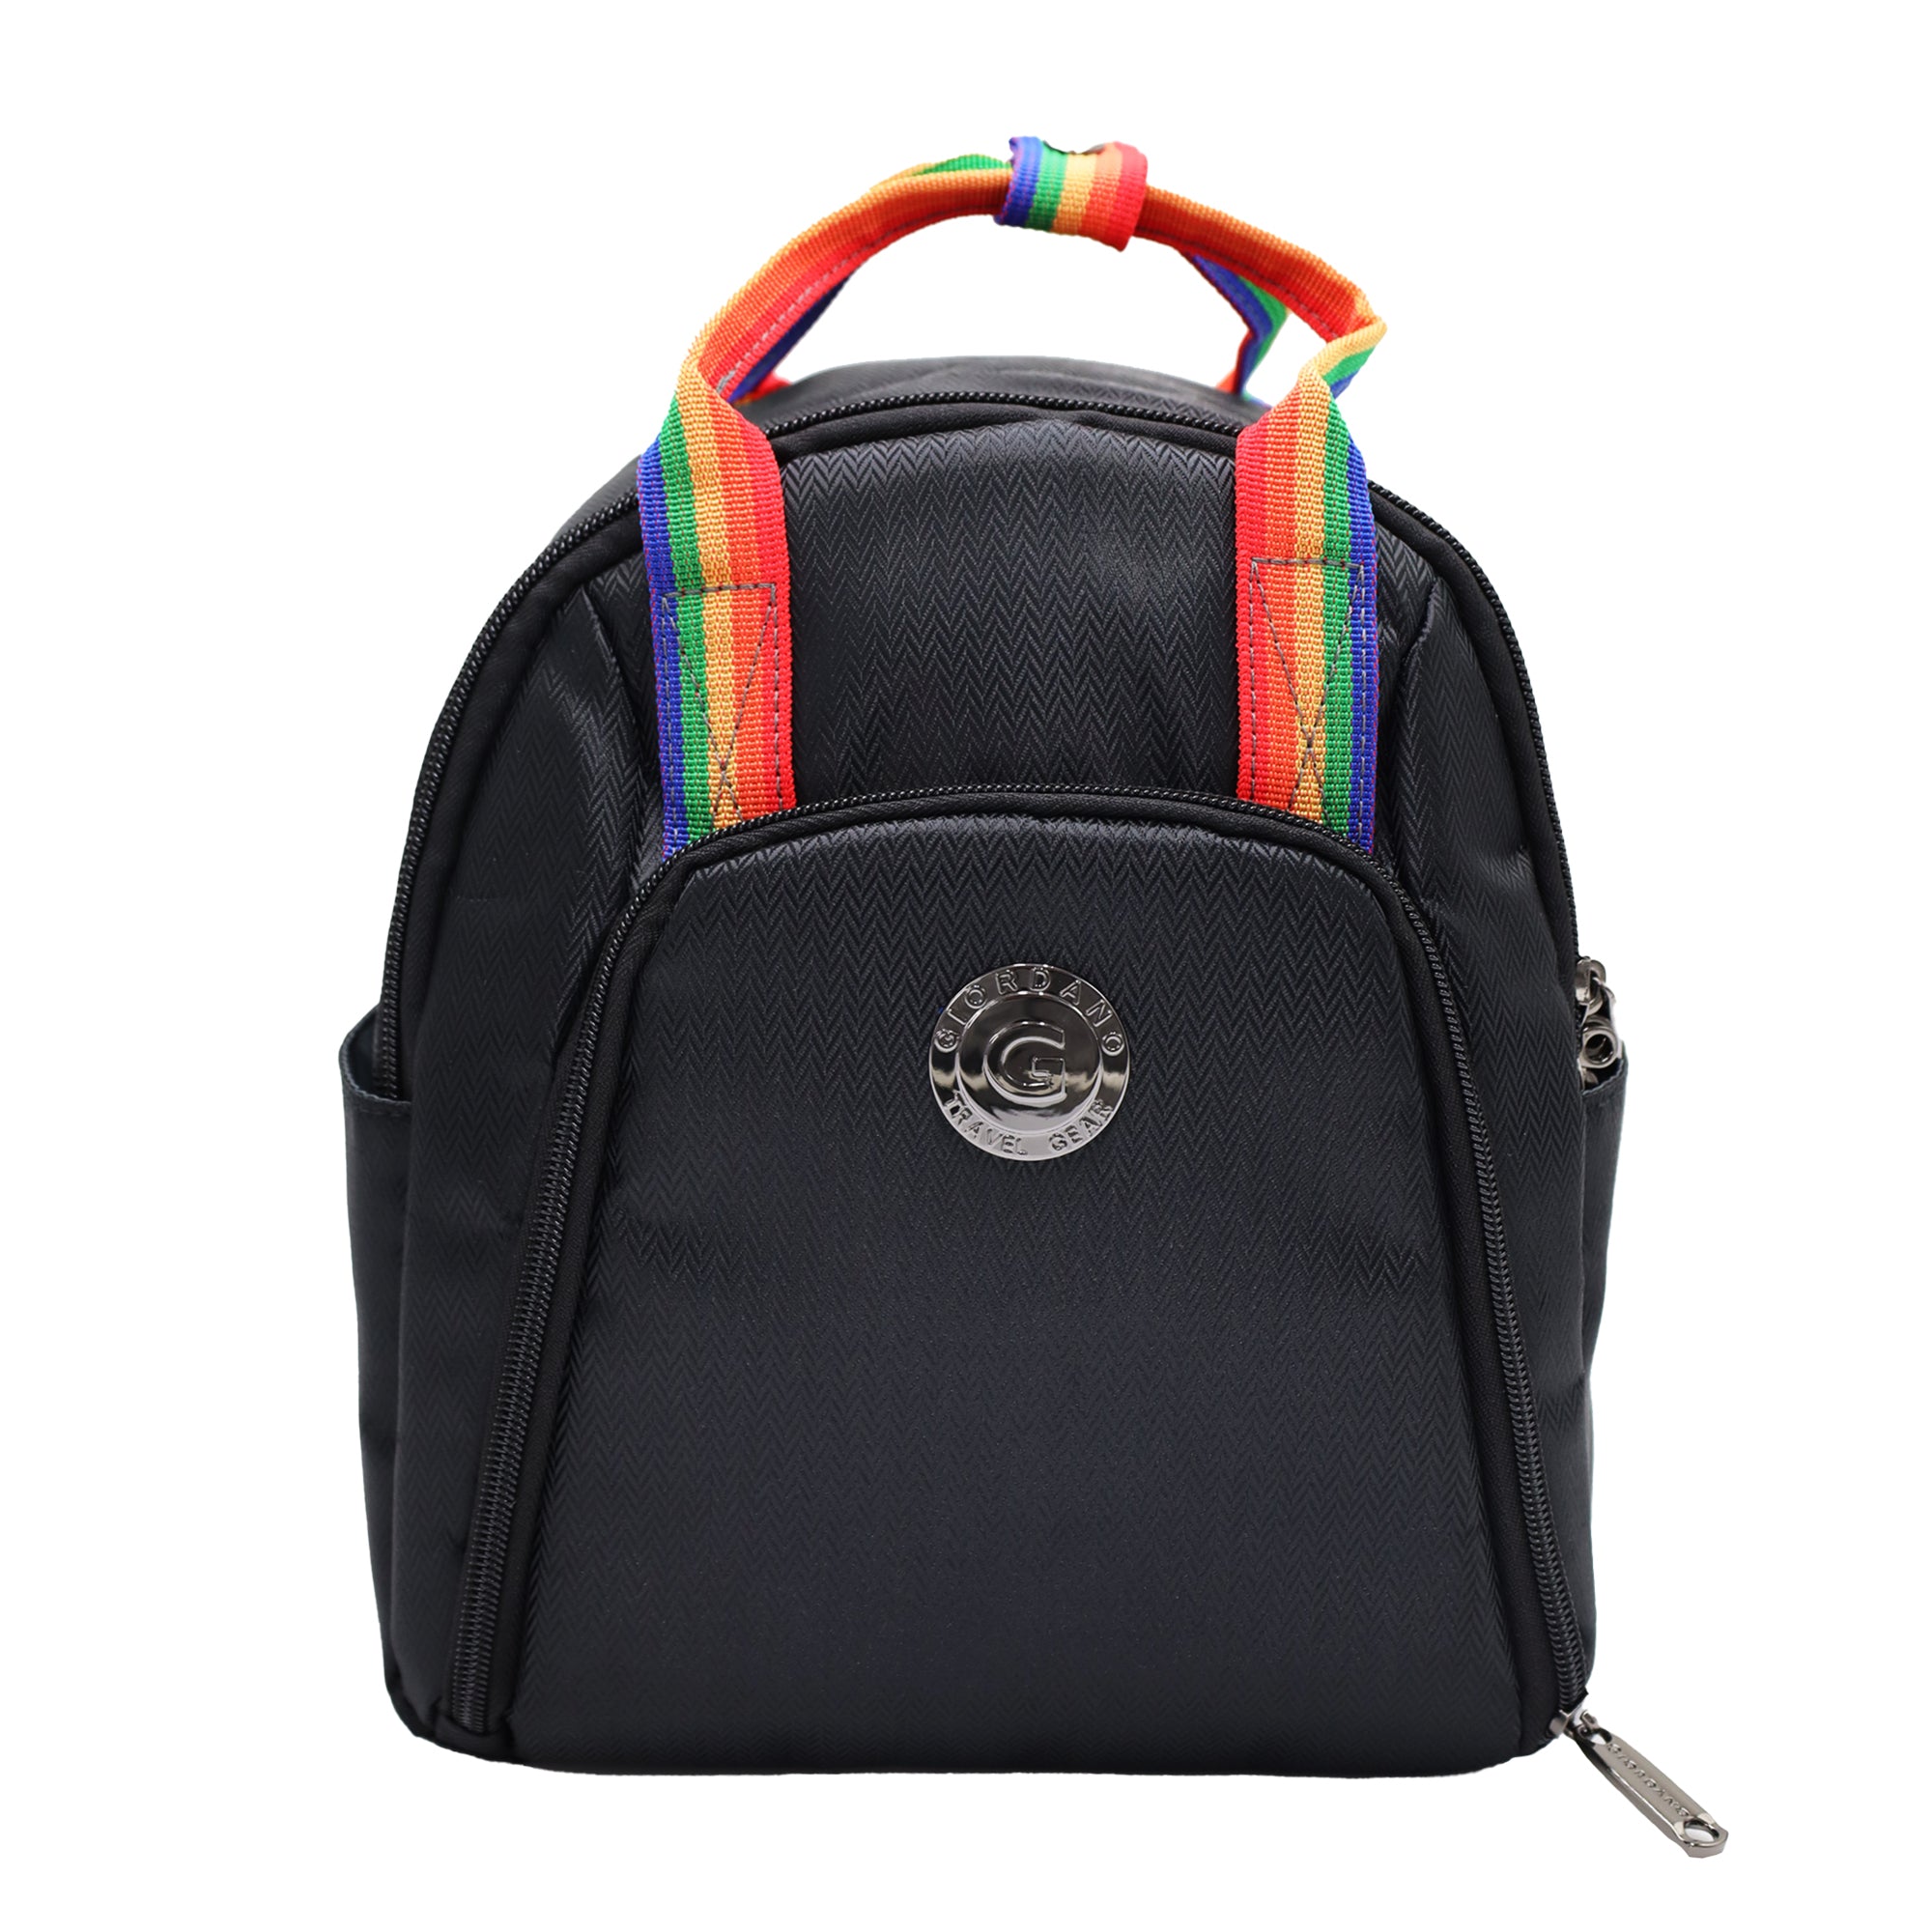 (New Arrivals)Travel Gear Backpack(Deli Free(YGN+MDY)